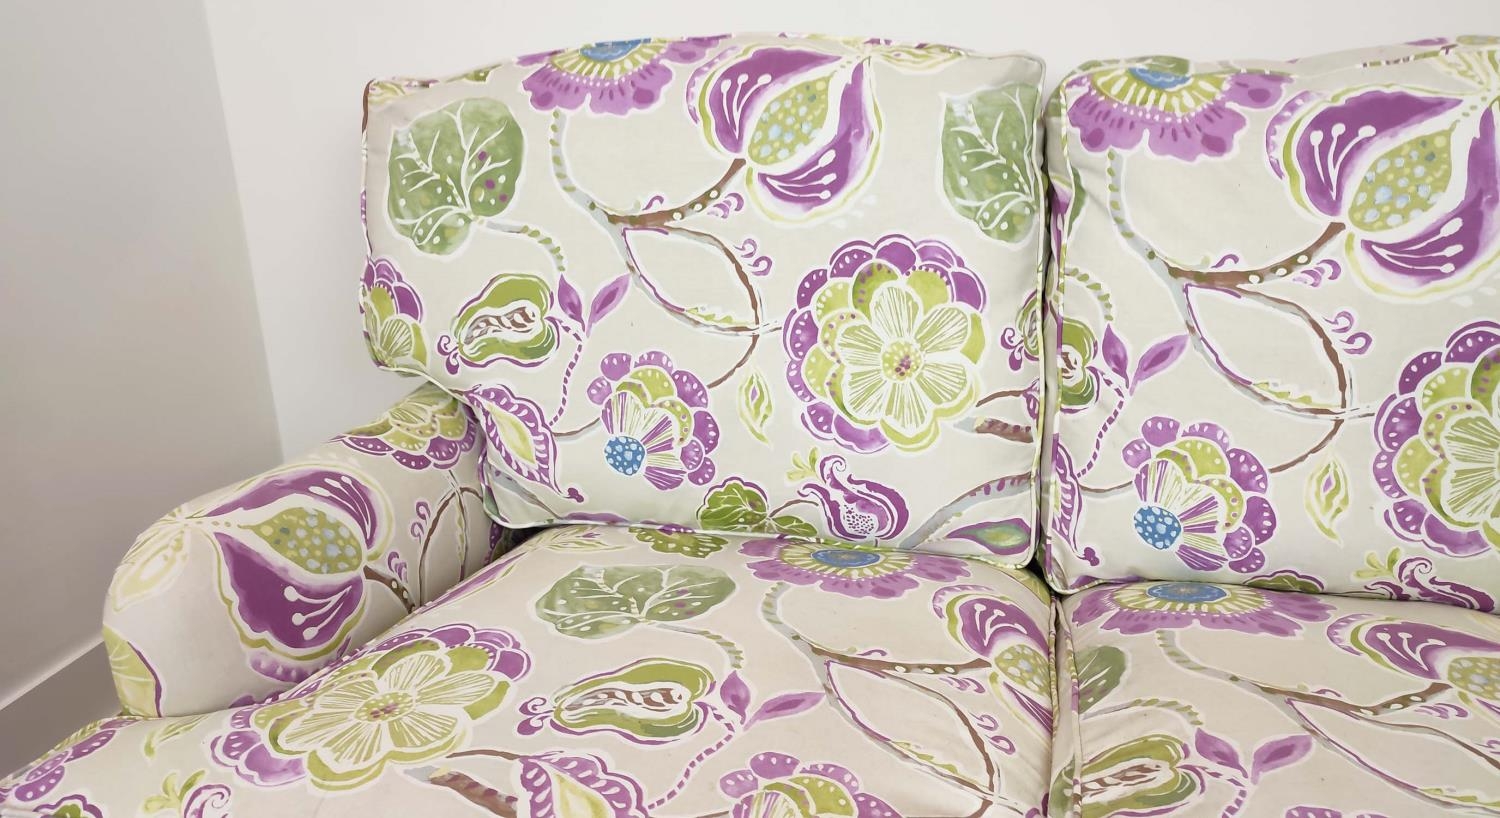 SOFA, purple and green floral patterned on brass castors, 90cm H x 160cm W. - Image 12 of 14